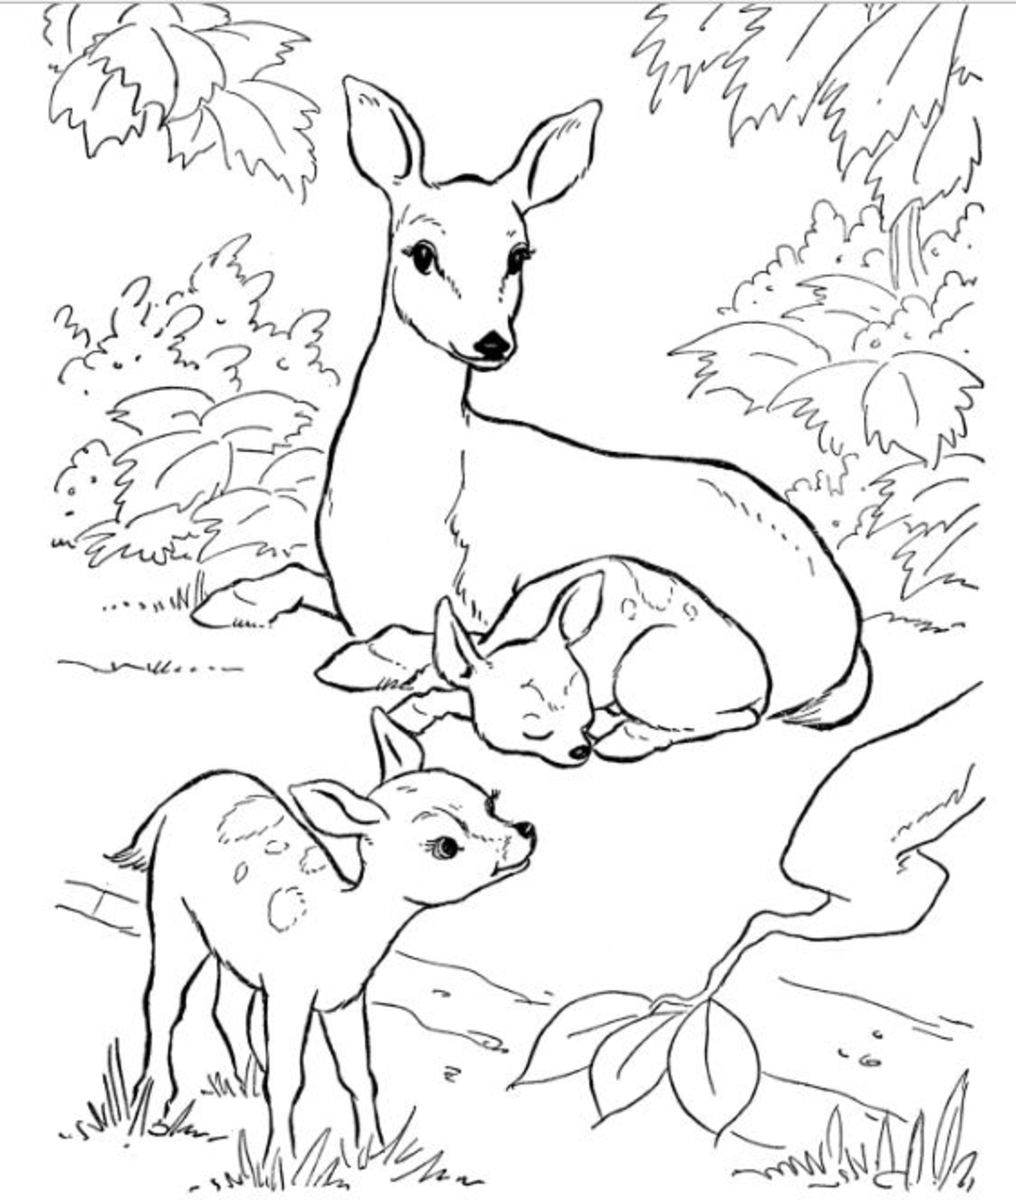 Backyard Animals and Nature Coloring Books Free Coloring ...